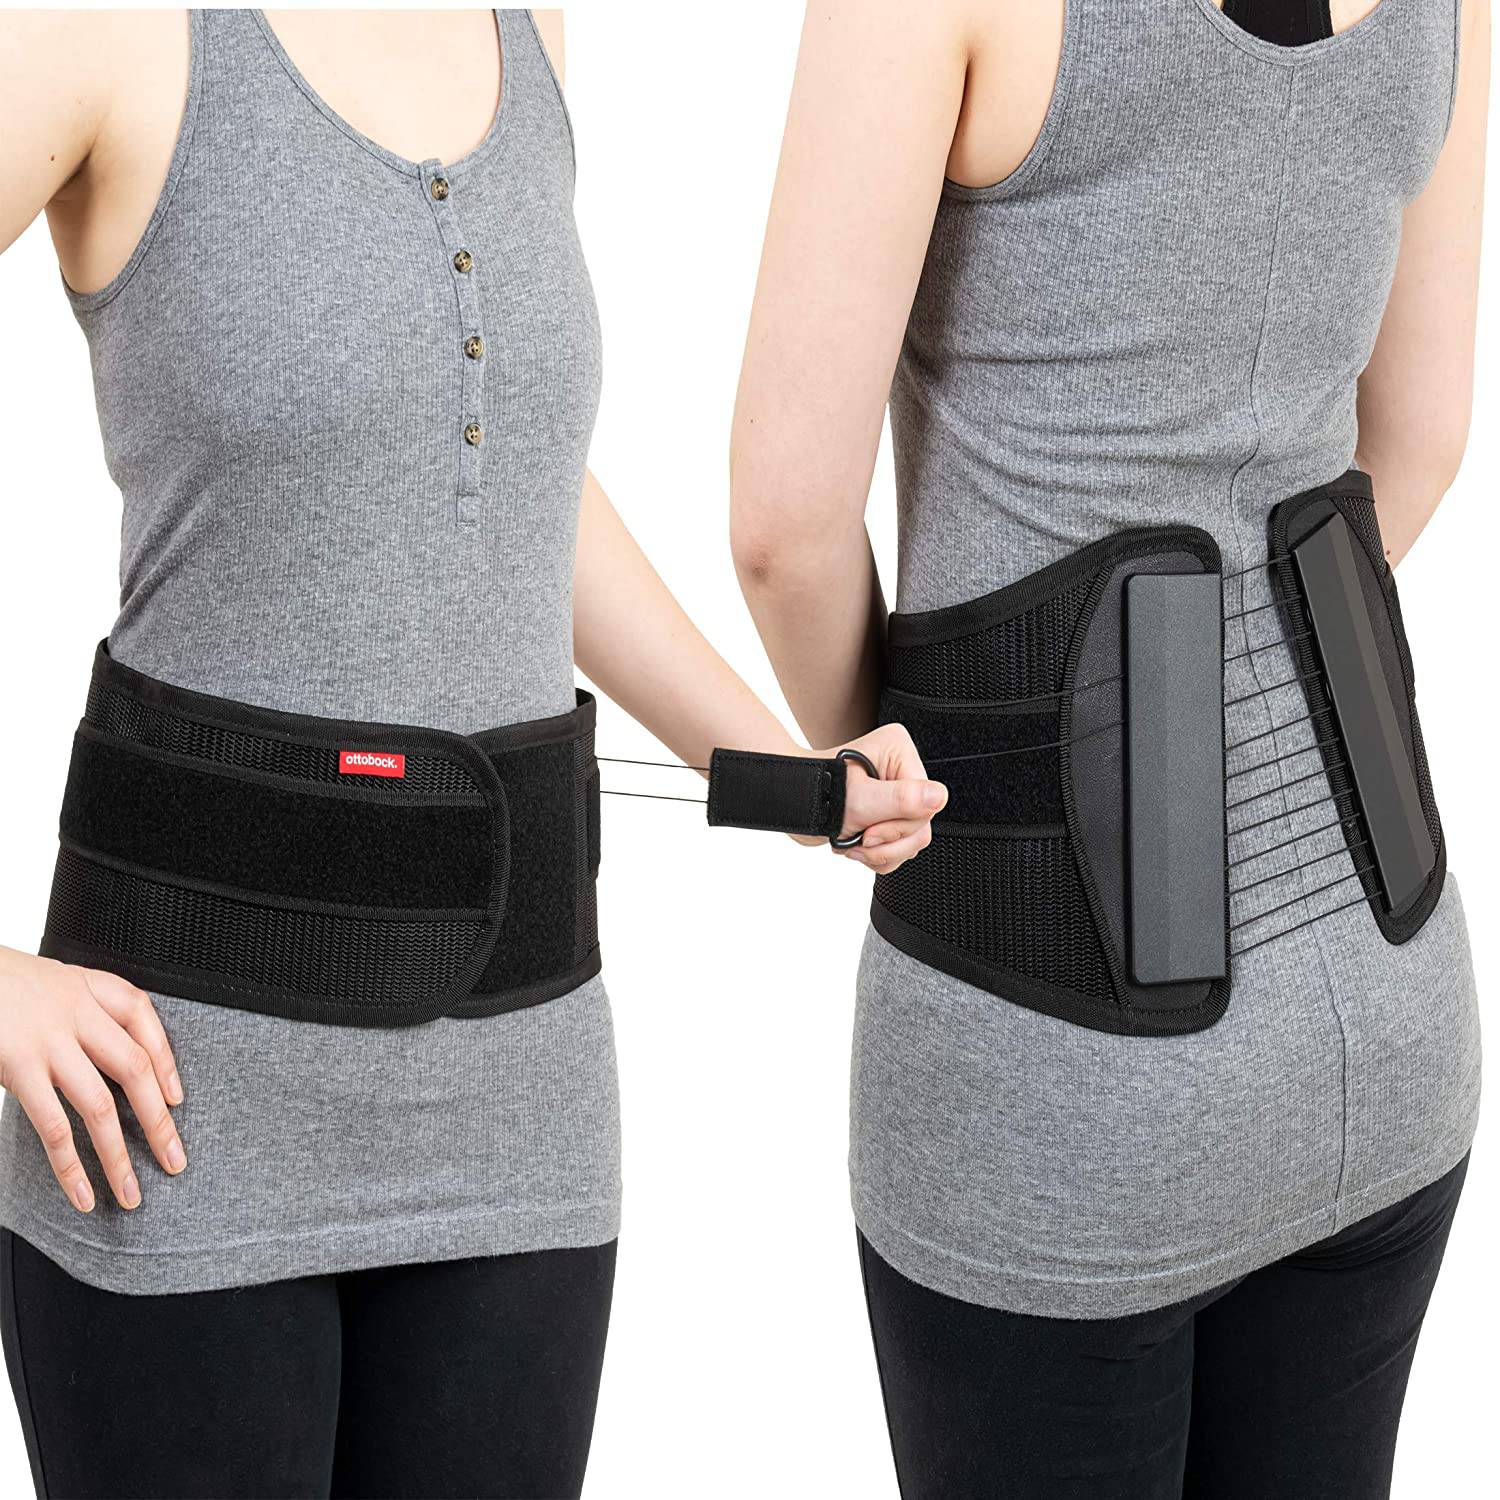 Back Brace for Support & Circulation